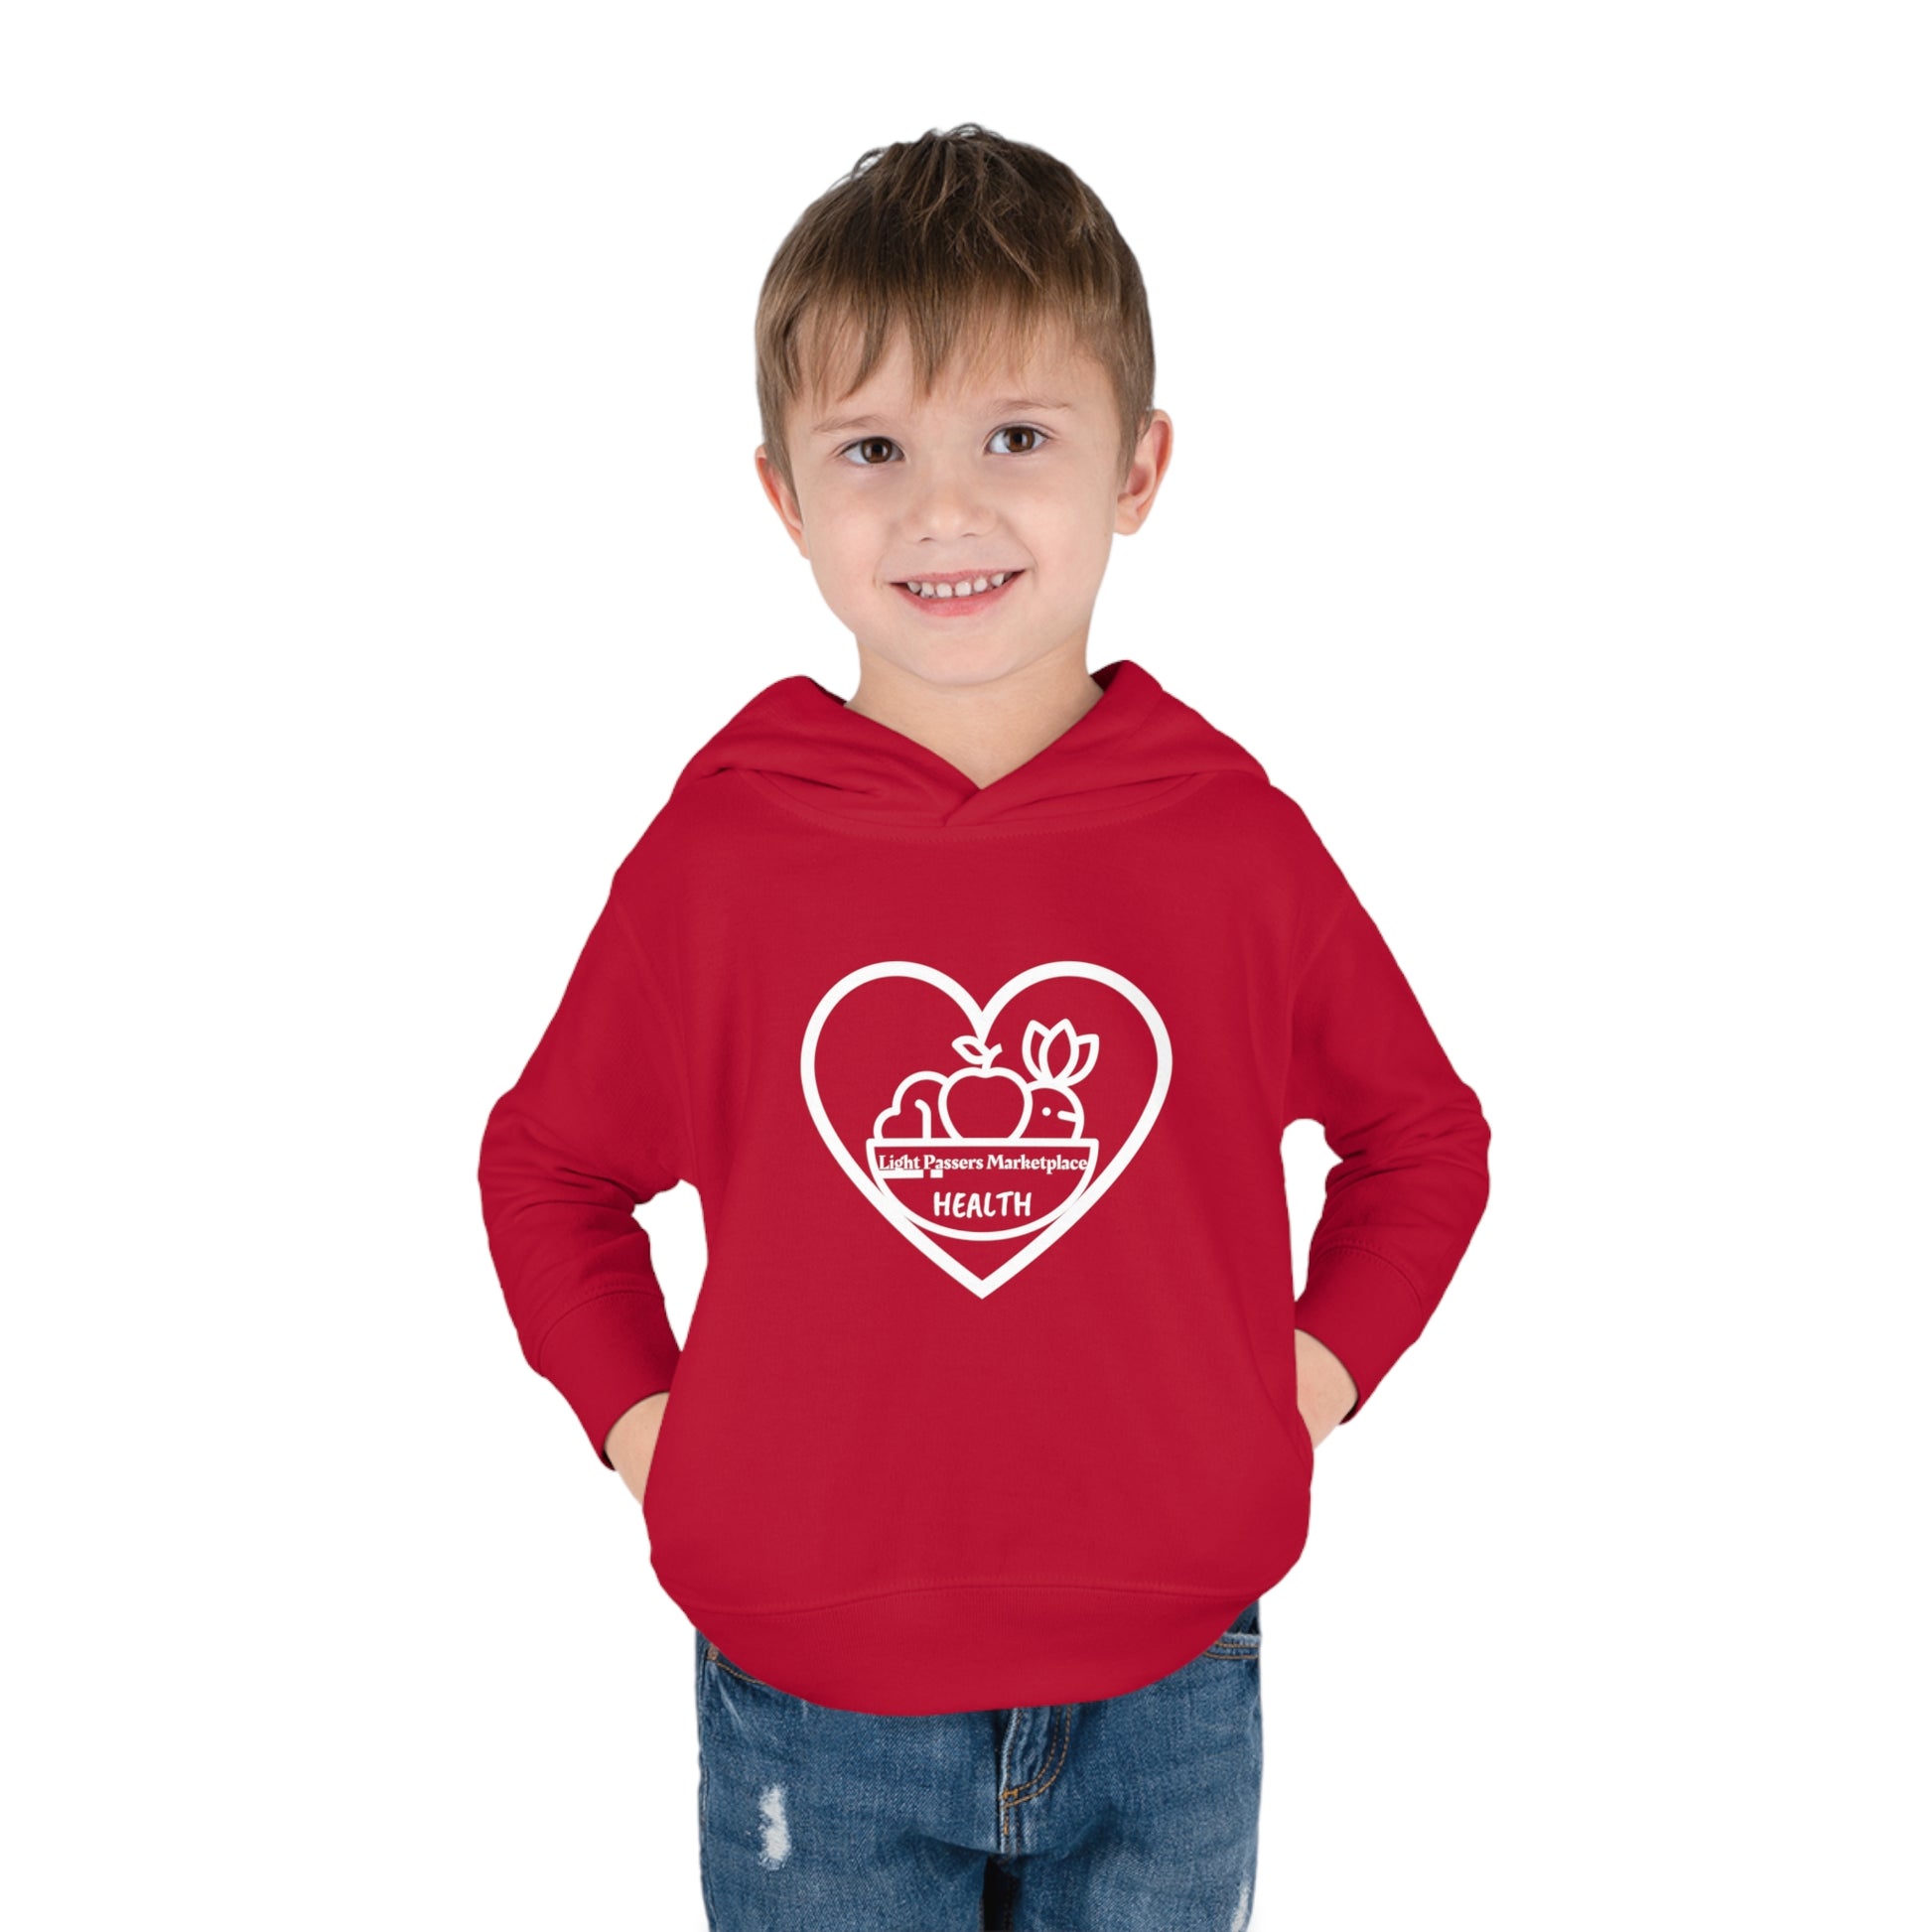 A toddler boy in a red Rabbit Skins hoodie with side seam pockets, cover-stitched details, and a jersey-lined hood. Designed for comfort and durability with 60% cotton, 40% polyester blend.